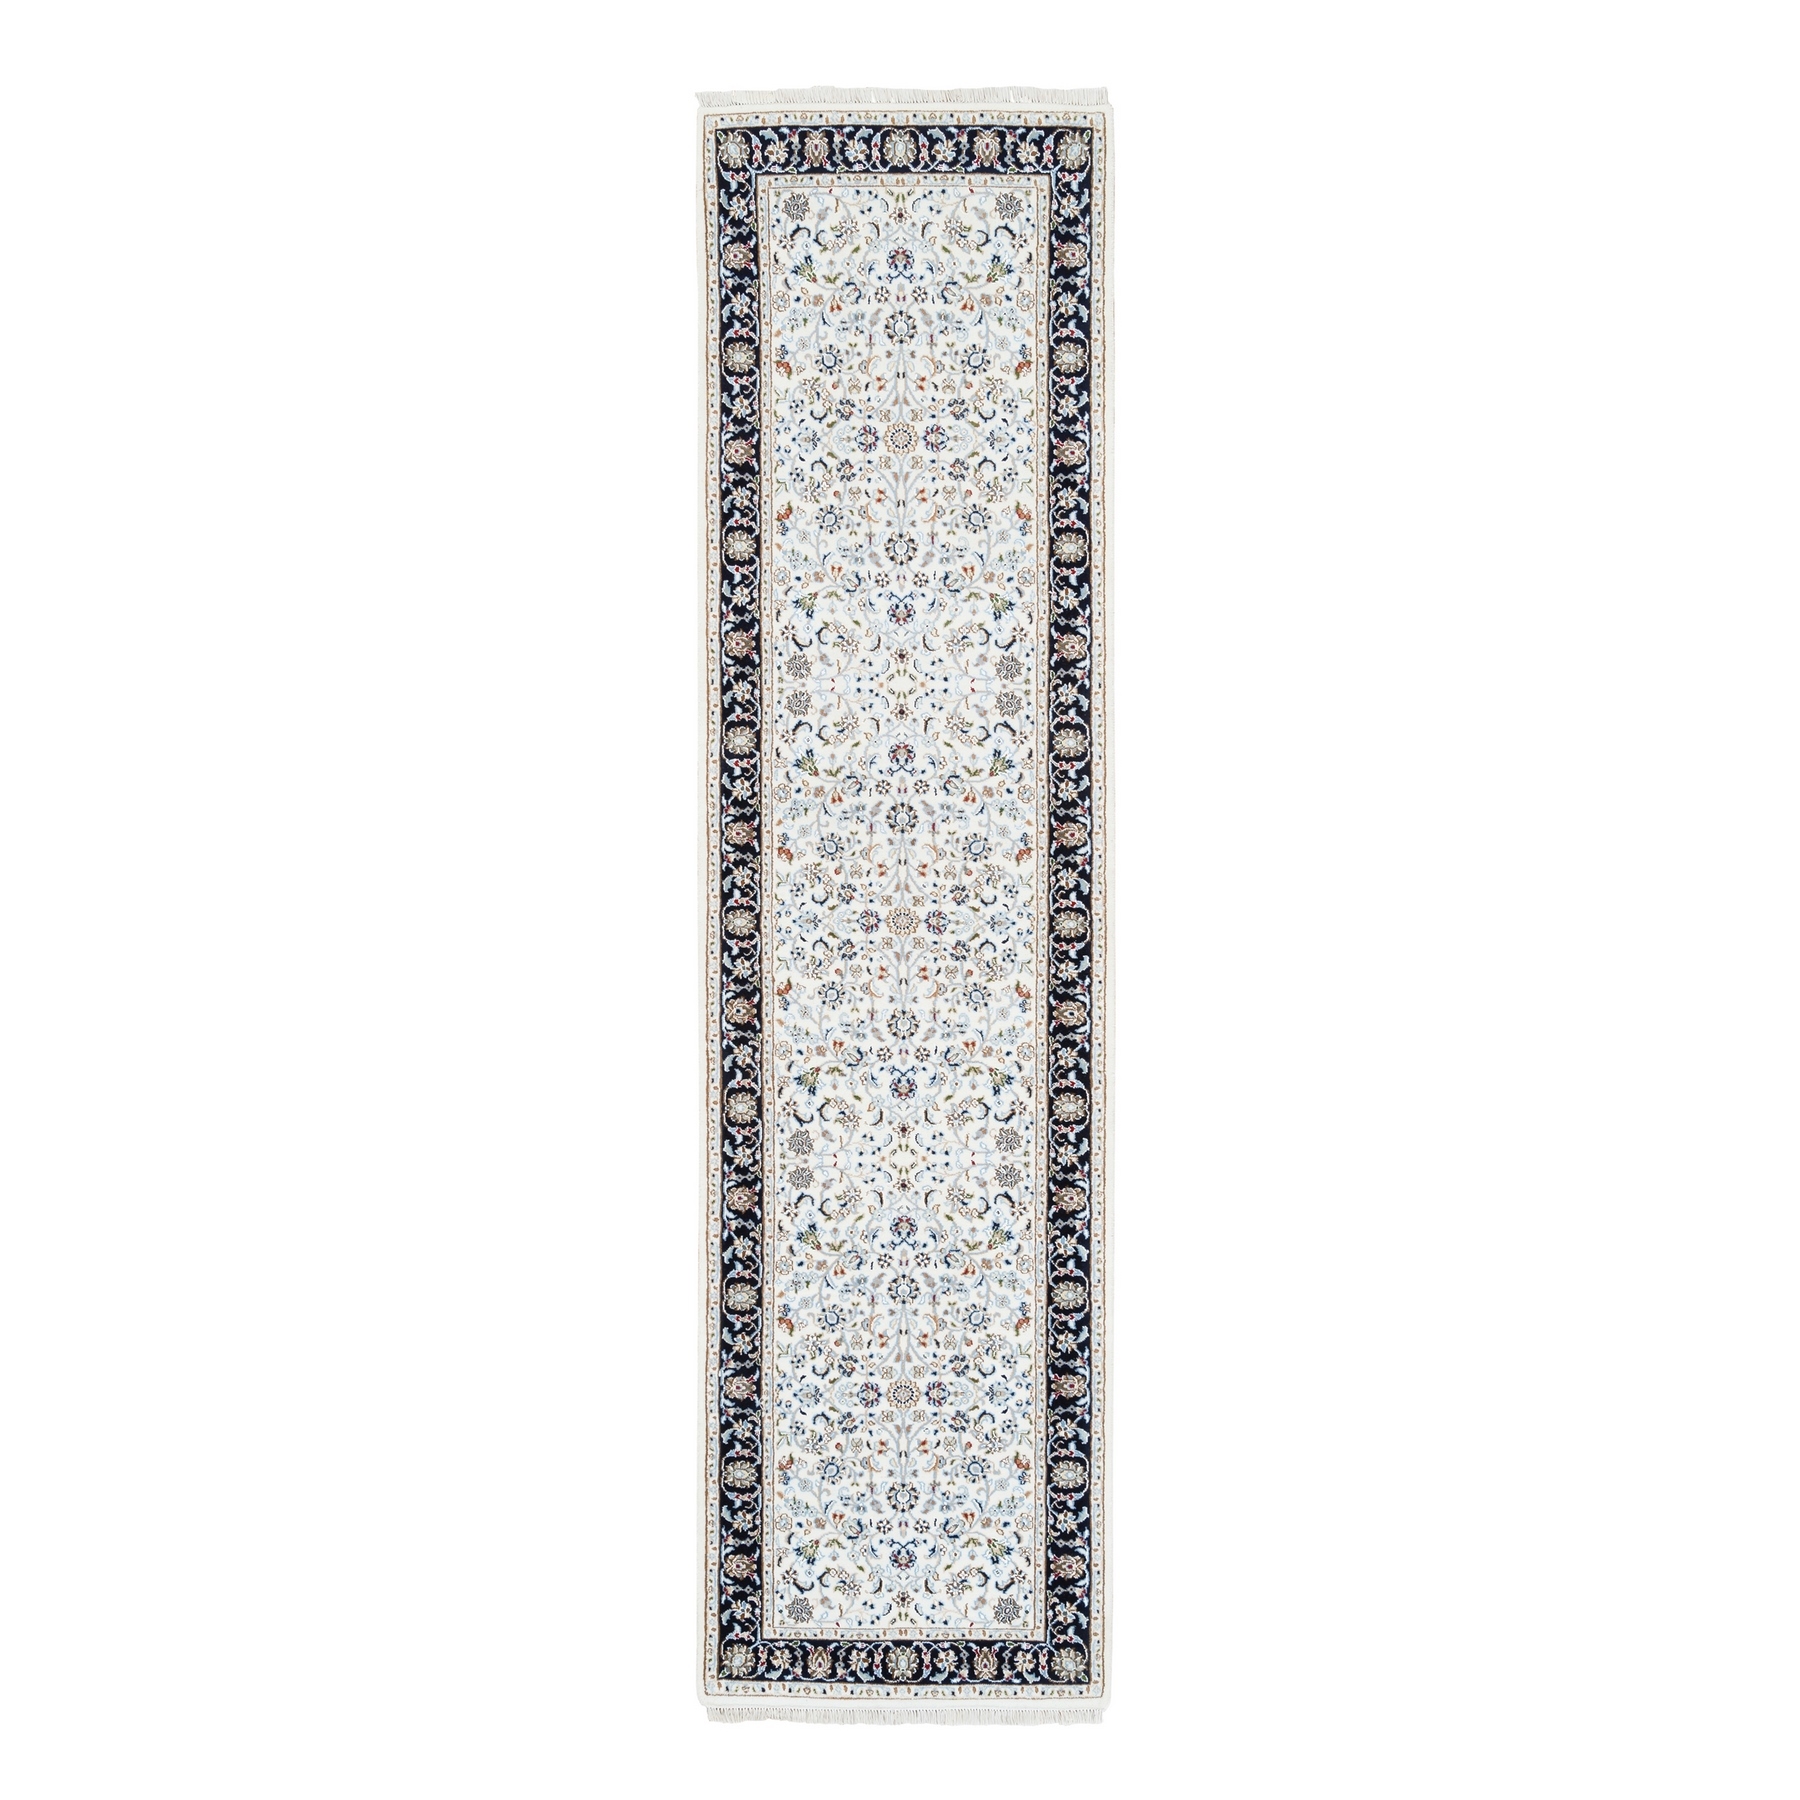 Pirniakan Collection Hand Knotted Ivory Rug No: 1125430